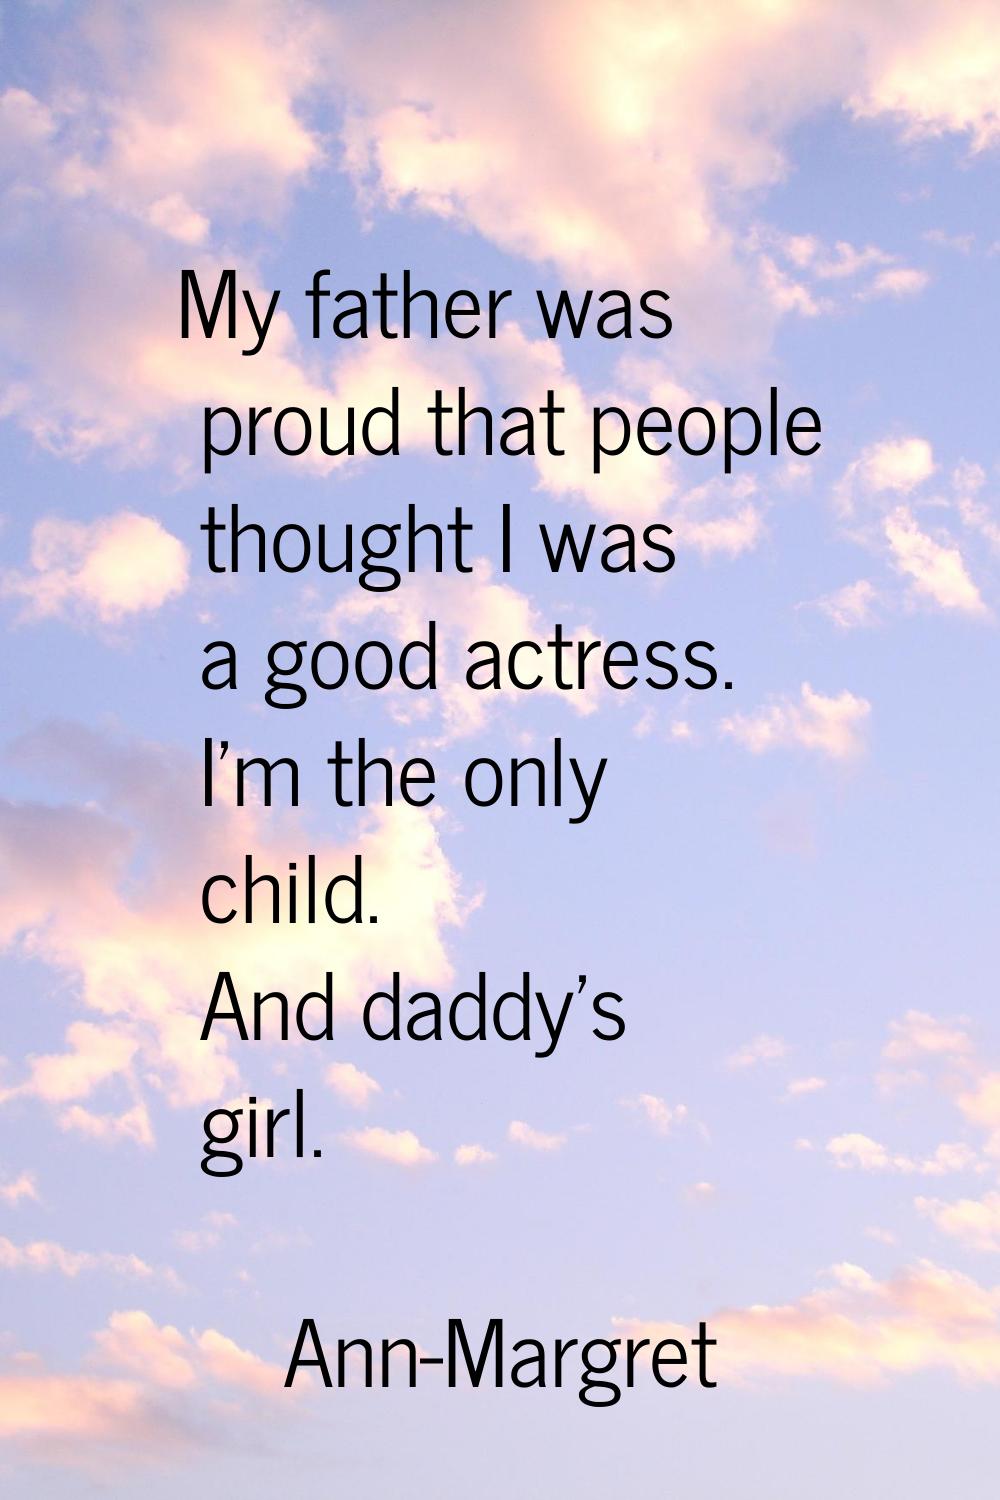 My father was proud that people thought I was a good actress. I'm the only child. And daddy's girl.